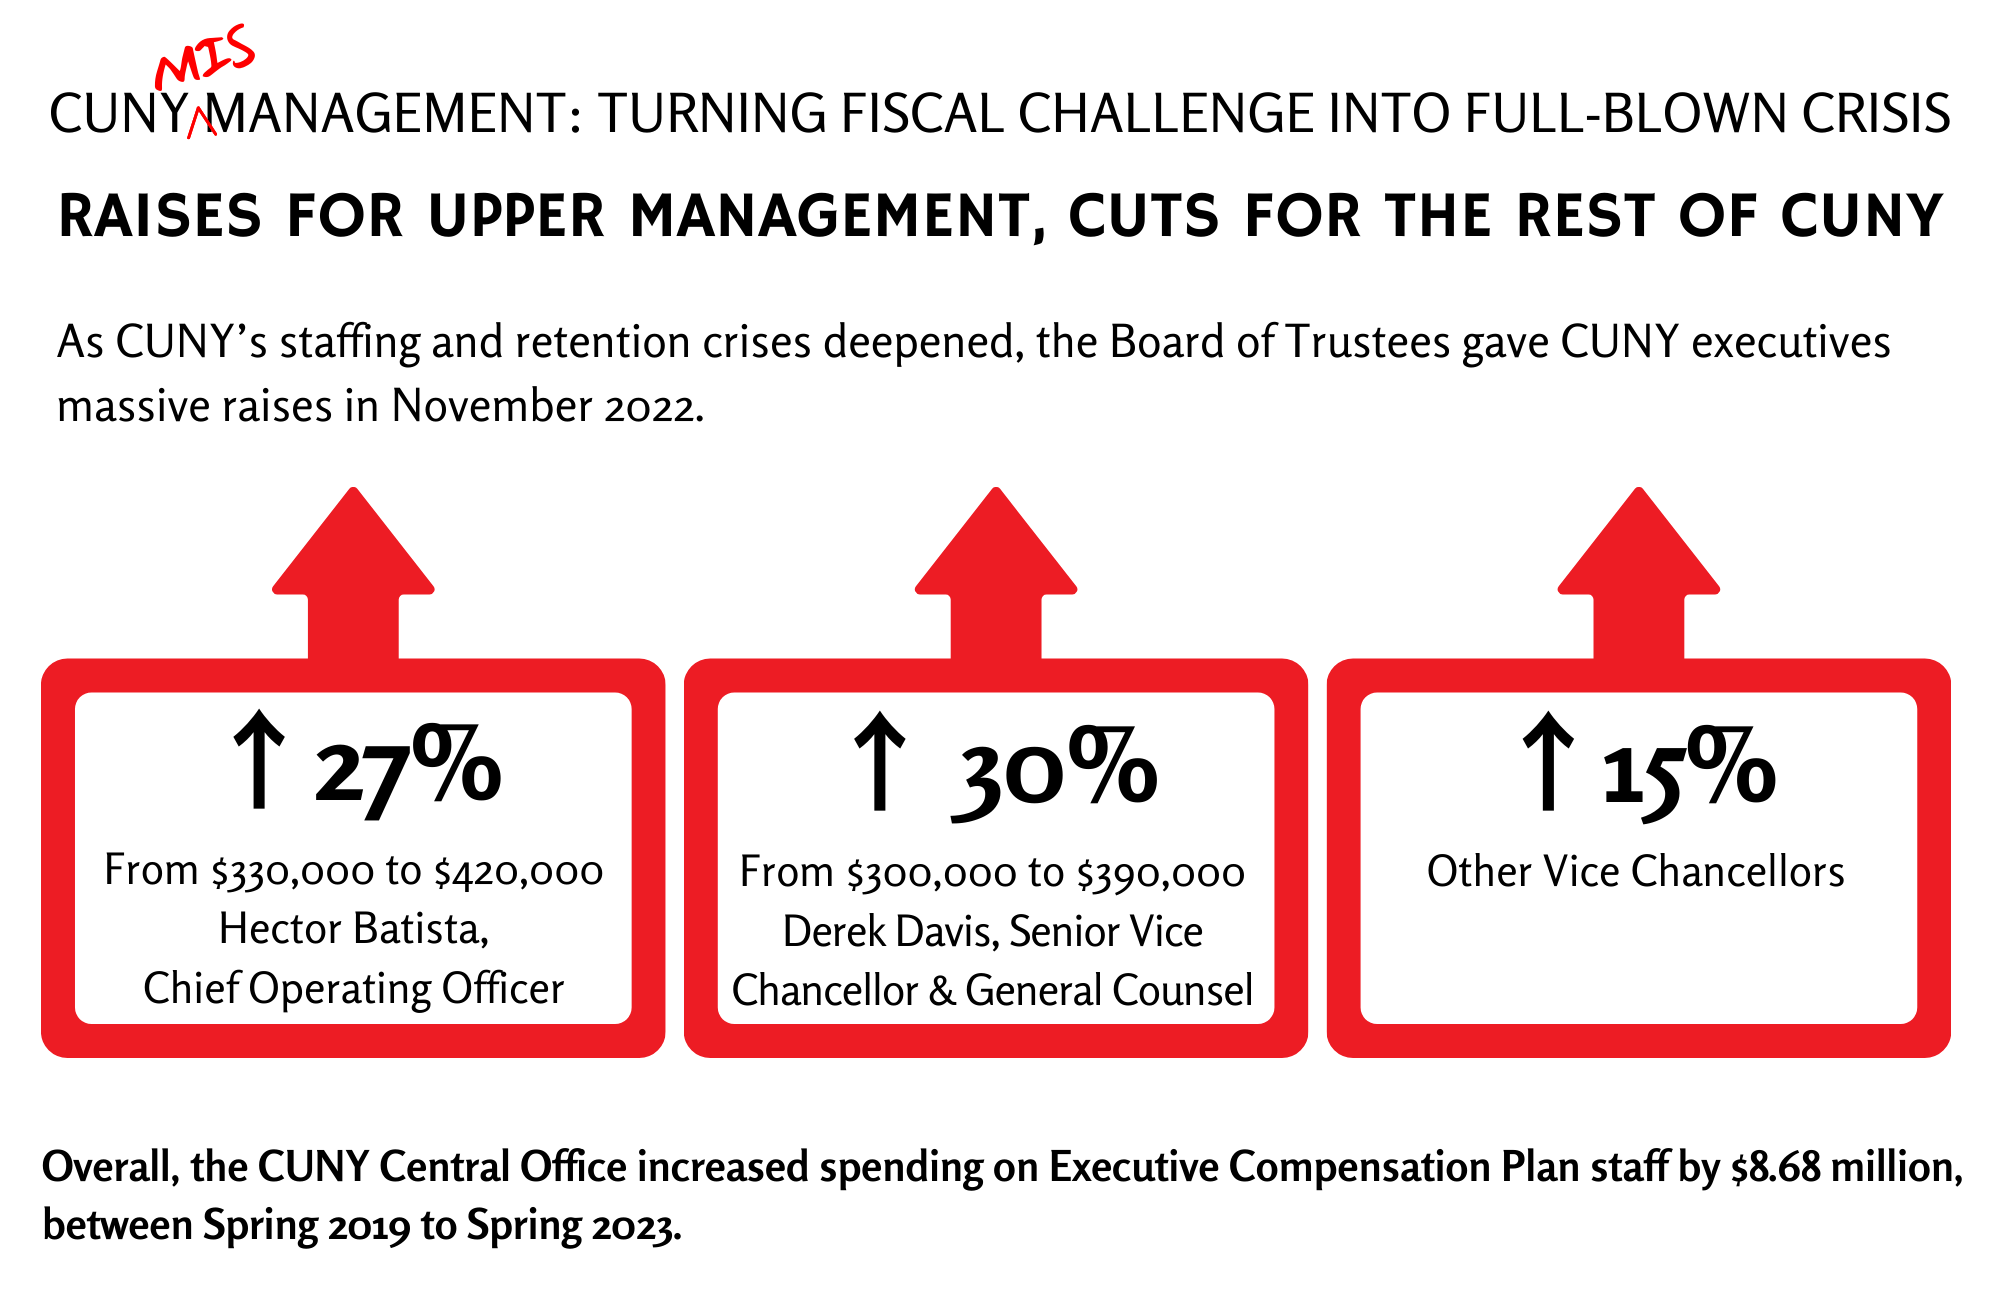 Overall, the CUNY Central Office increased spending on Executive Compensation Plan staff by $8.68 million, between Spring 2019 to Spring 2023.